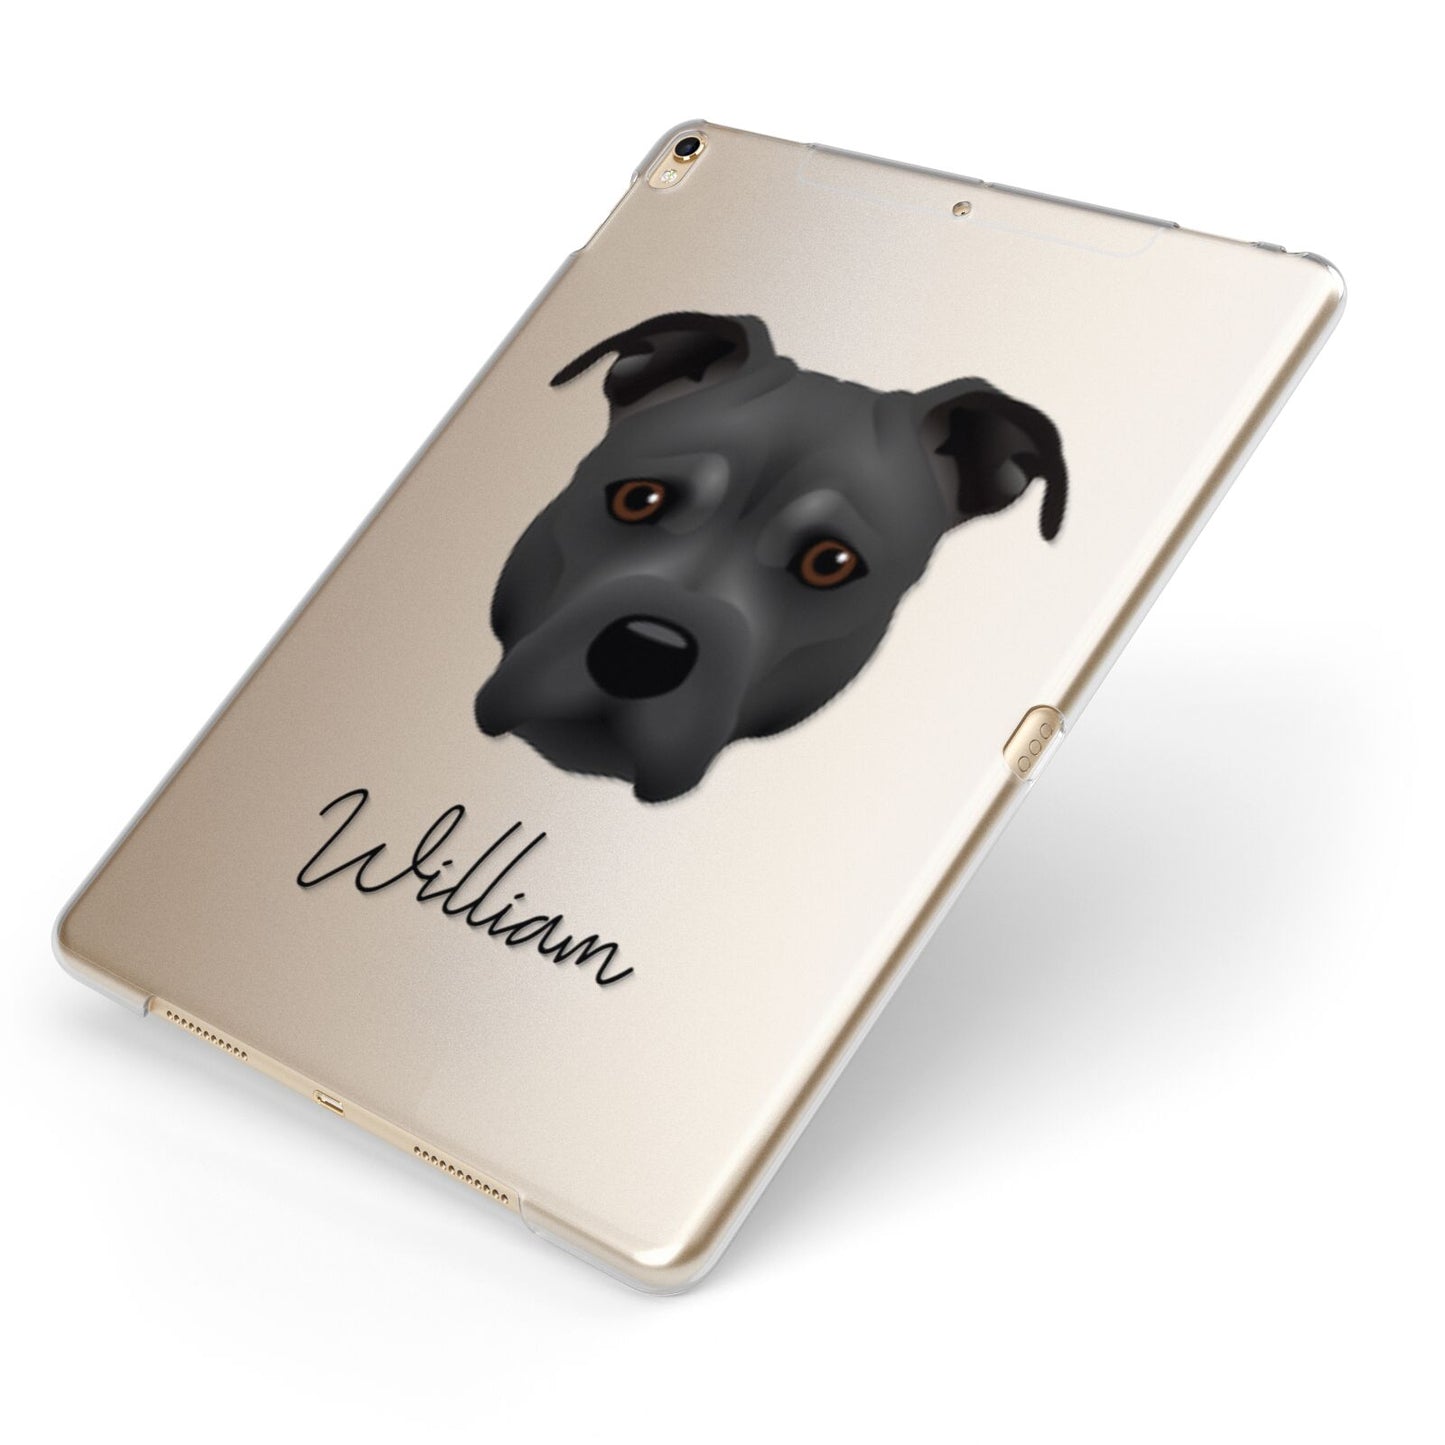 Staffordshire Bull Terrier Personalised Apple iPad Case on Gold iPad Side View